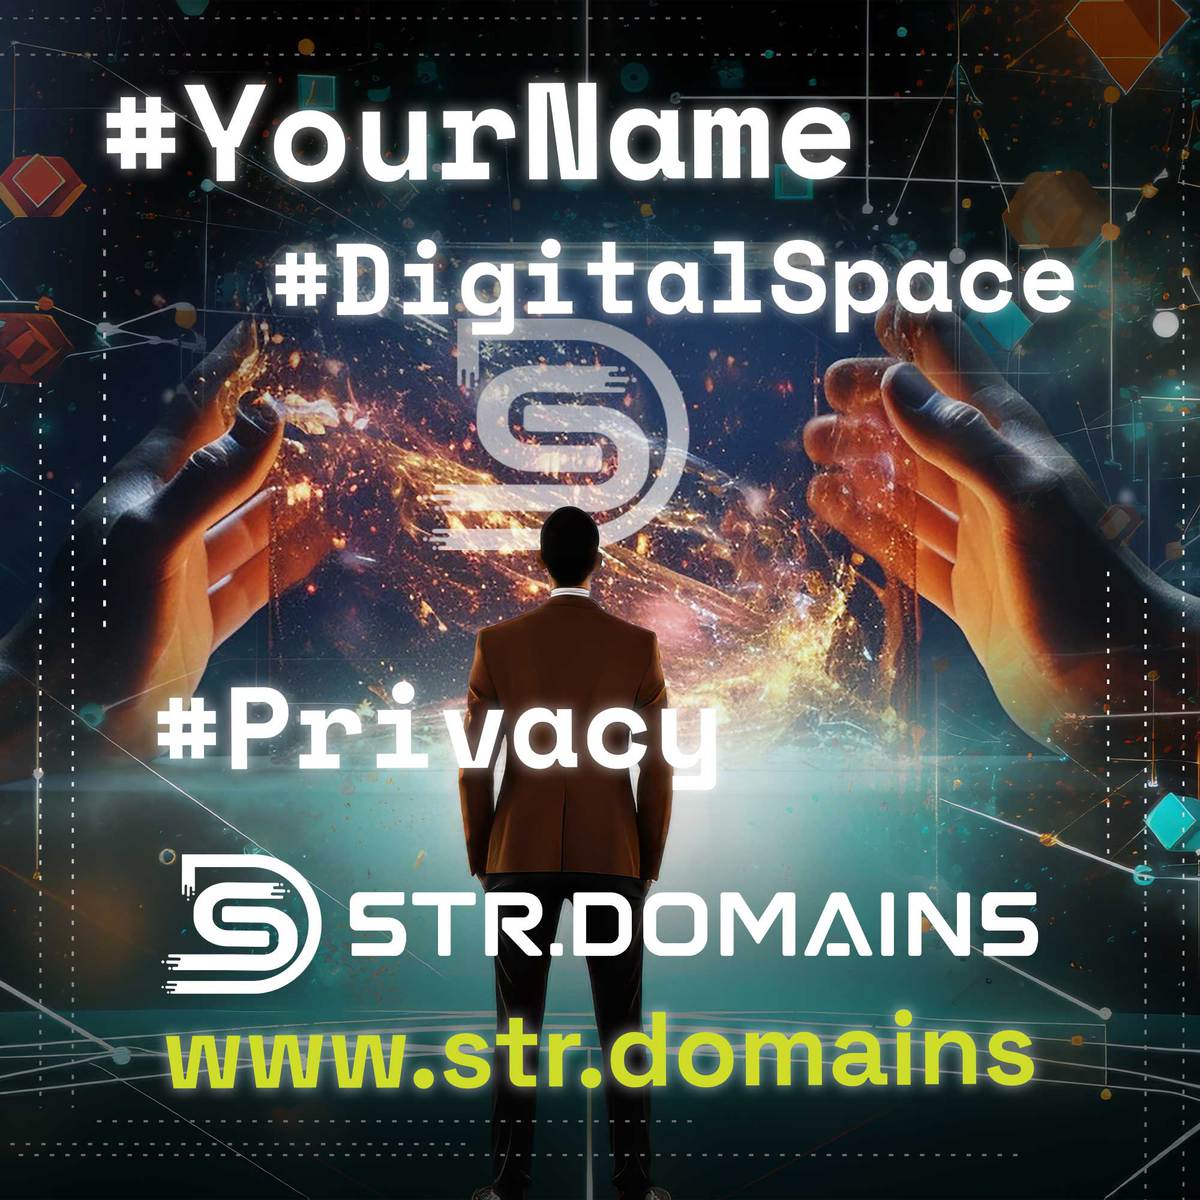 Ever thought about owning your own corner of the web? With #STRDomains, it’s easier than ever! 🚀🖥️

Instant recognition, total control, and unbeatable security. 🔐❤️

Get started today!
str.domains

#DigitalFreedom #DigitalIdentity